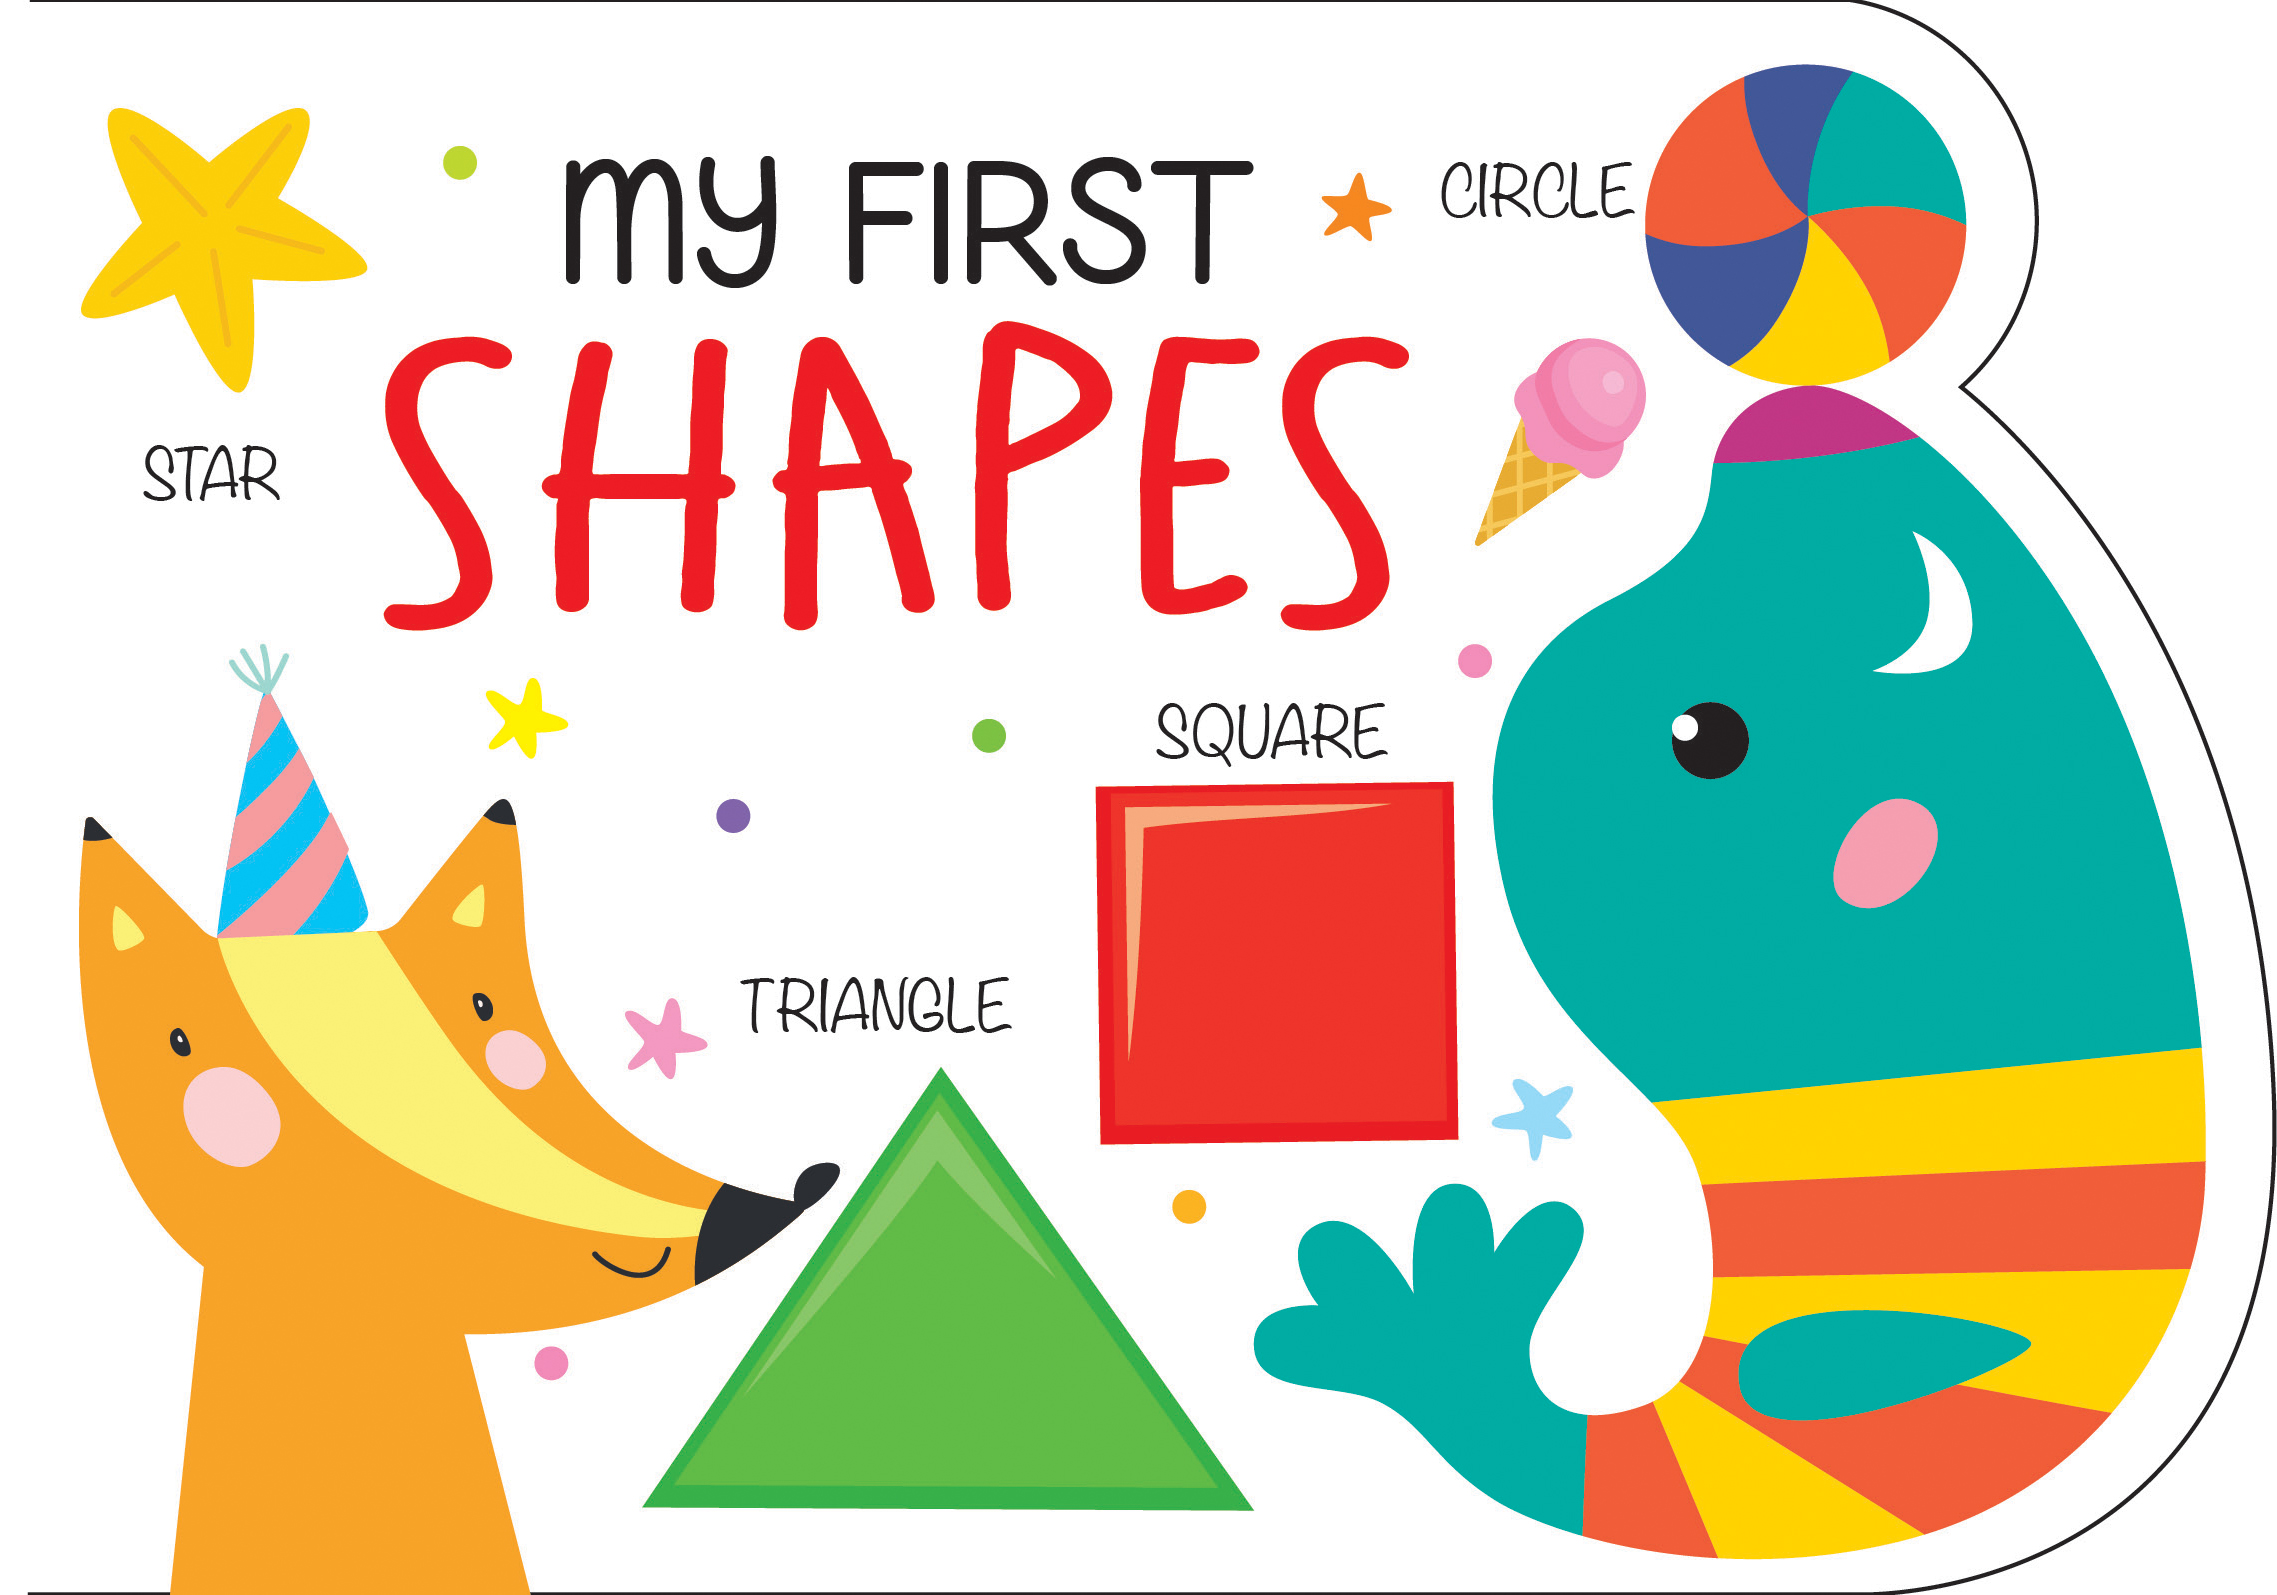 My First Shapes Board book